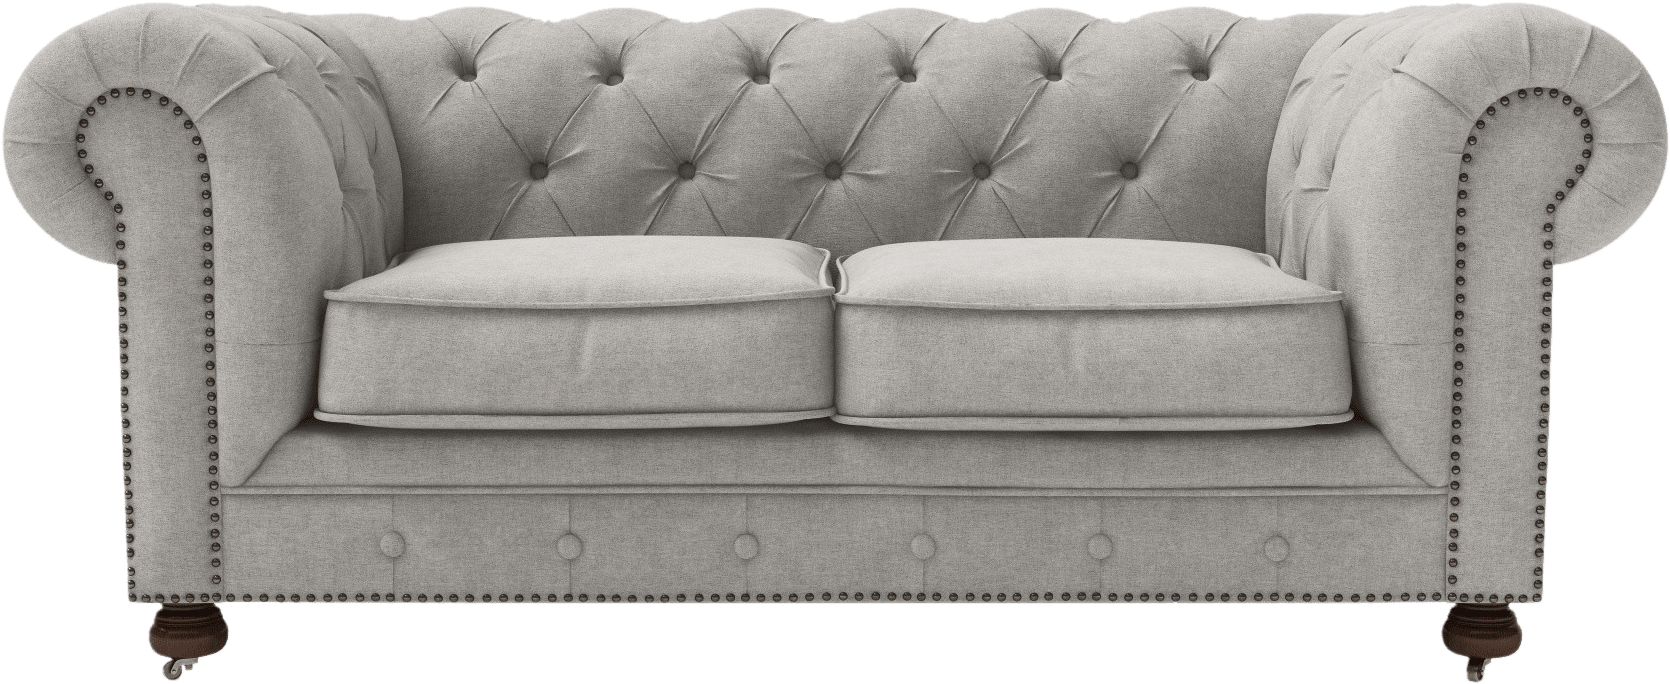 A White Couch With Buttons